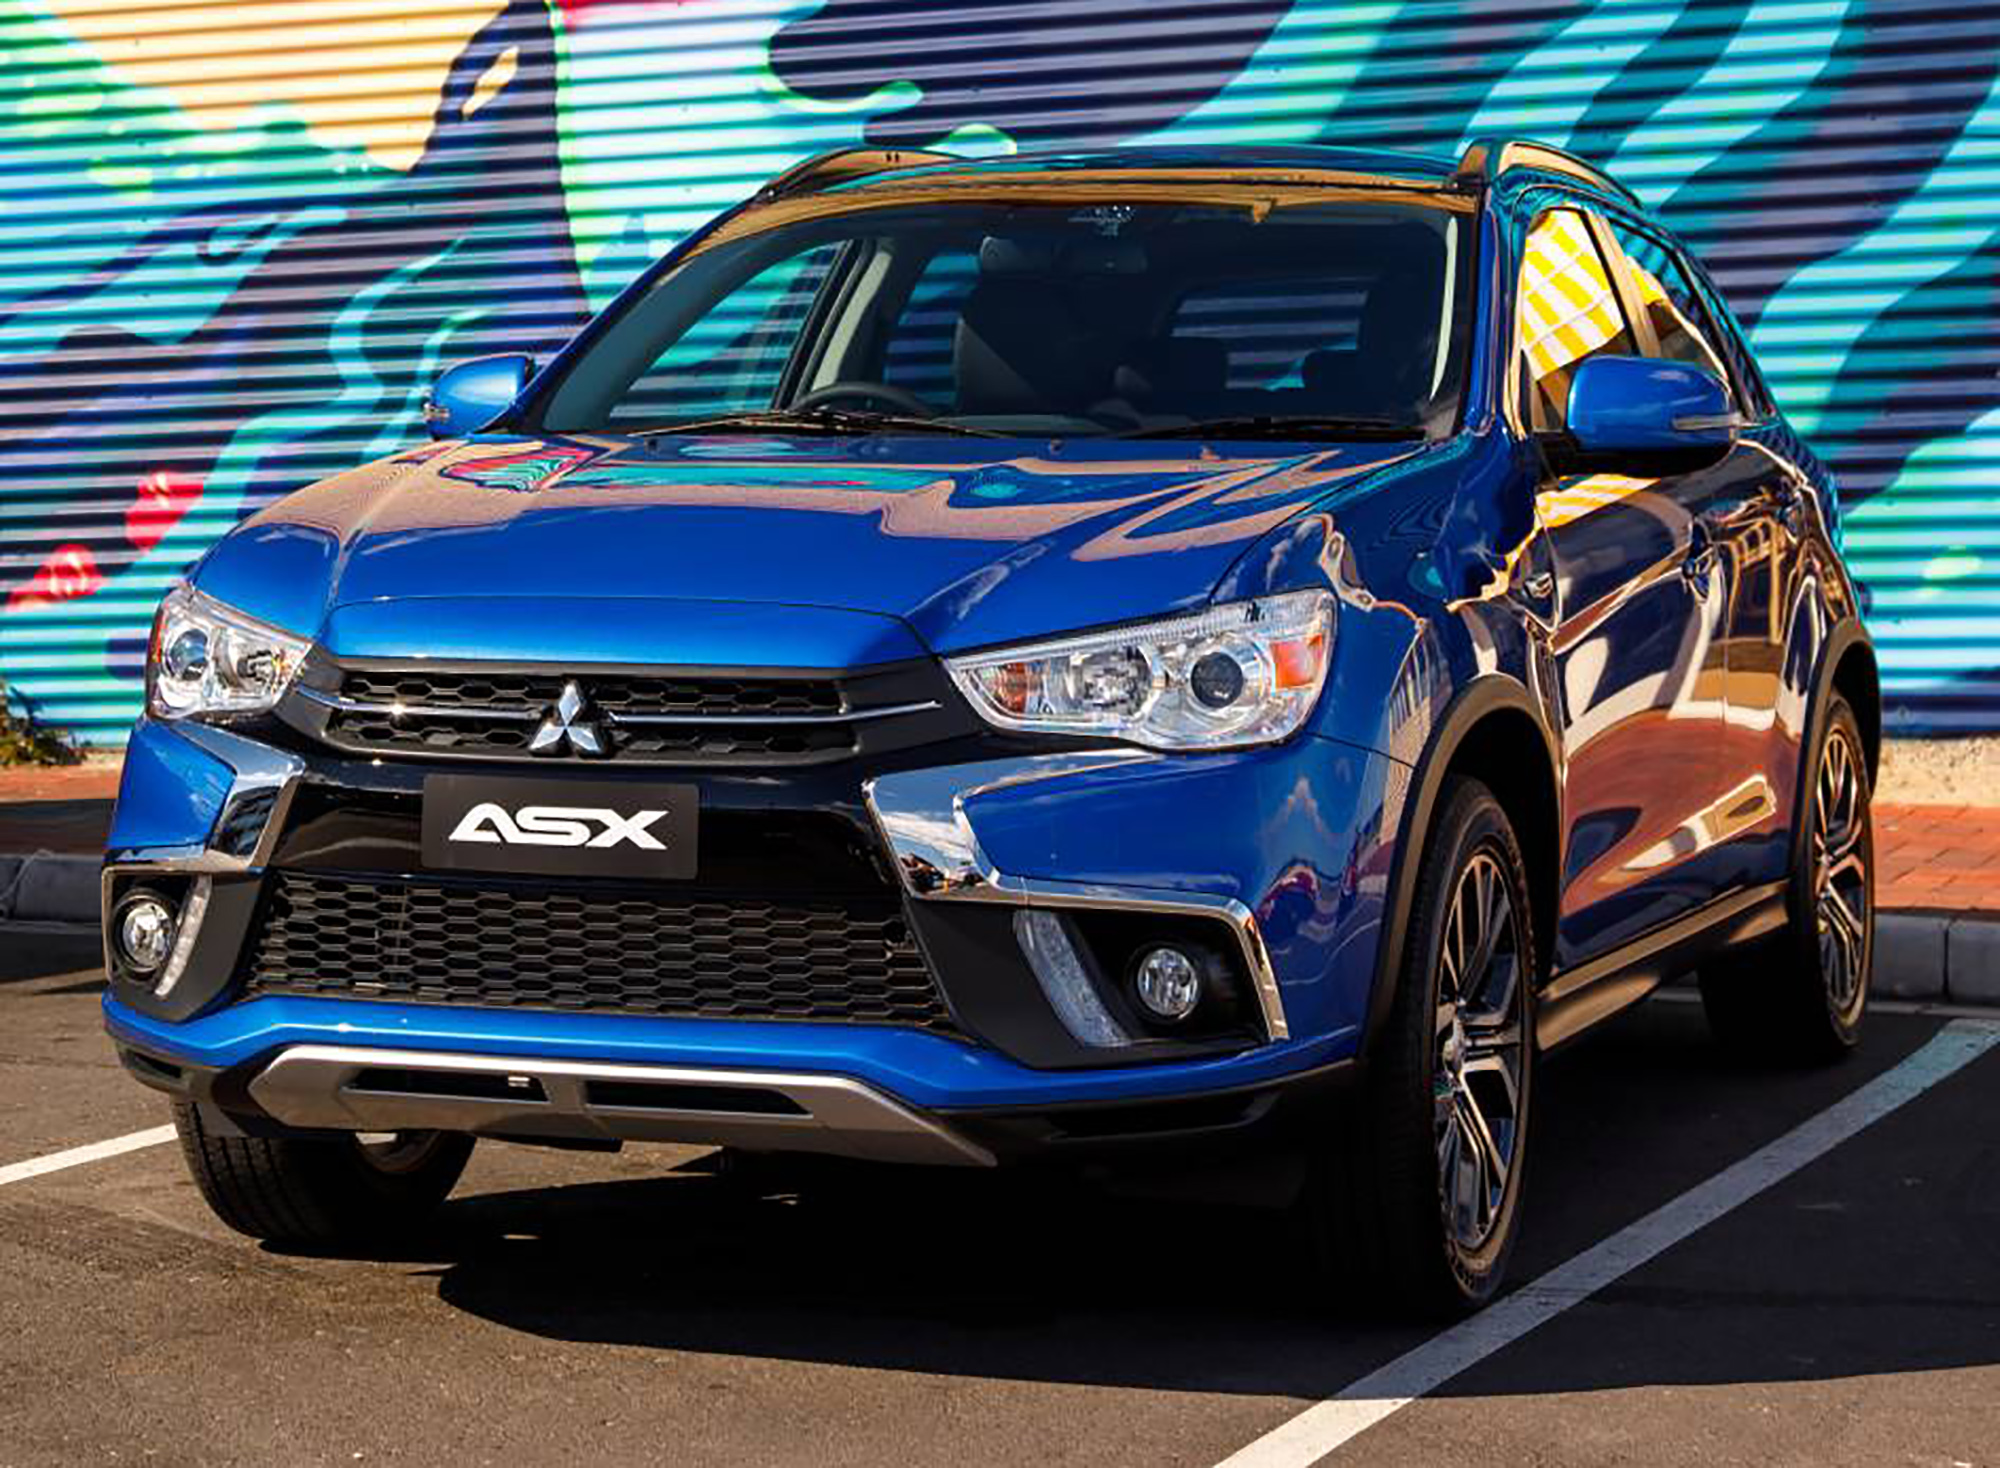 2018 Mitsubishi ASX pricing and specs Photos (1 of 4)